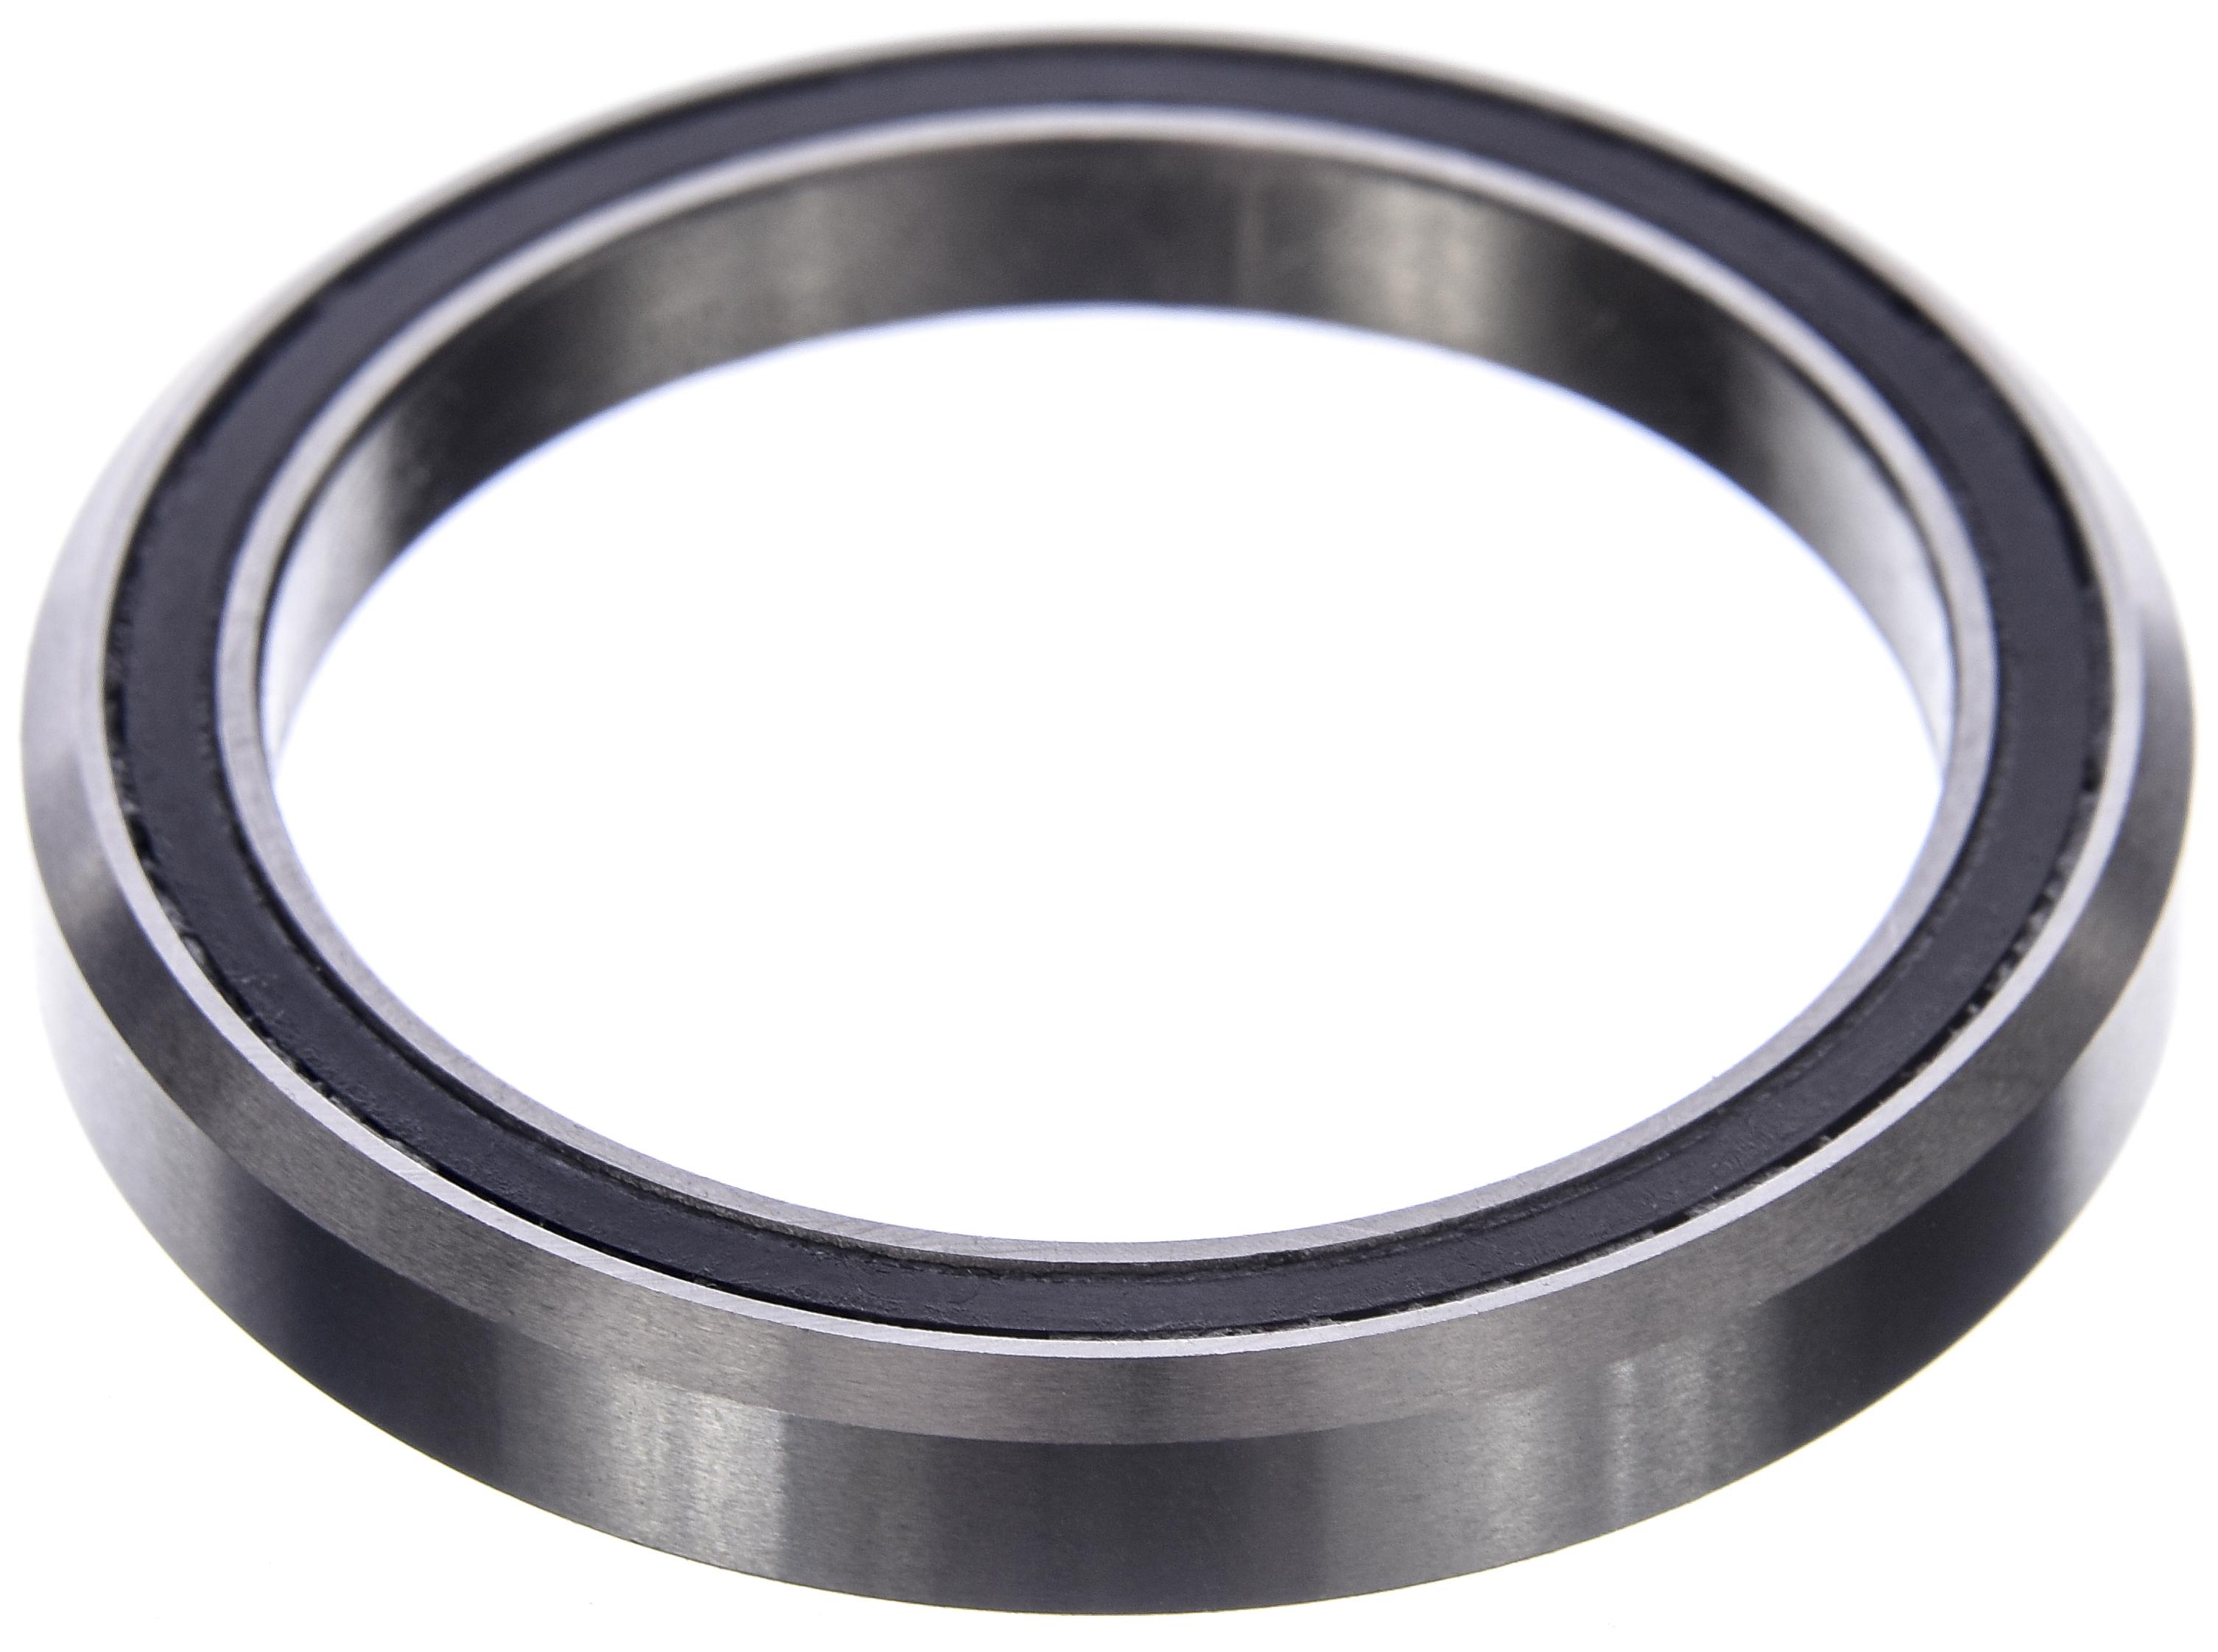 Nukeproof Replacement Zs66 Headset Bearing  Black